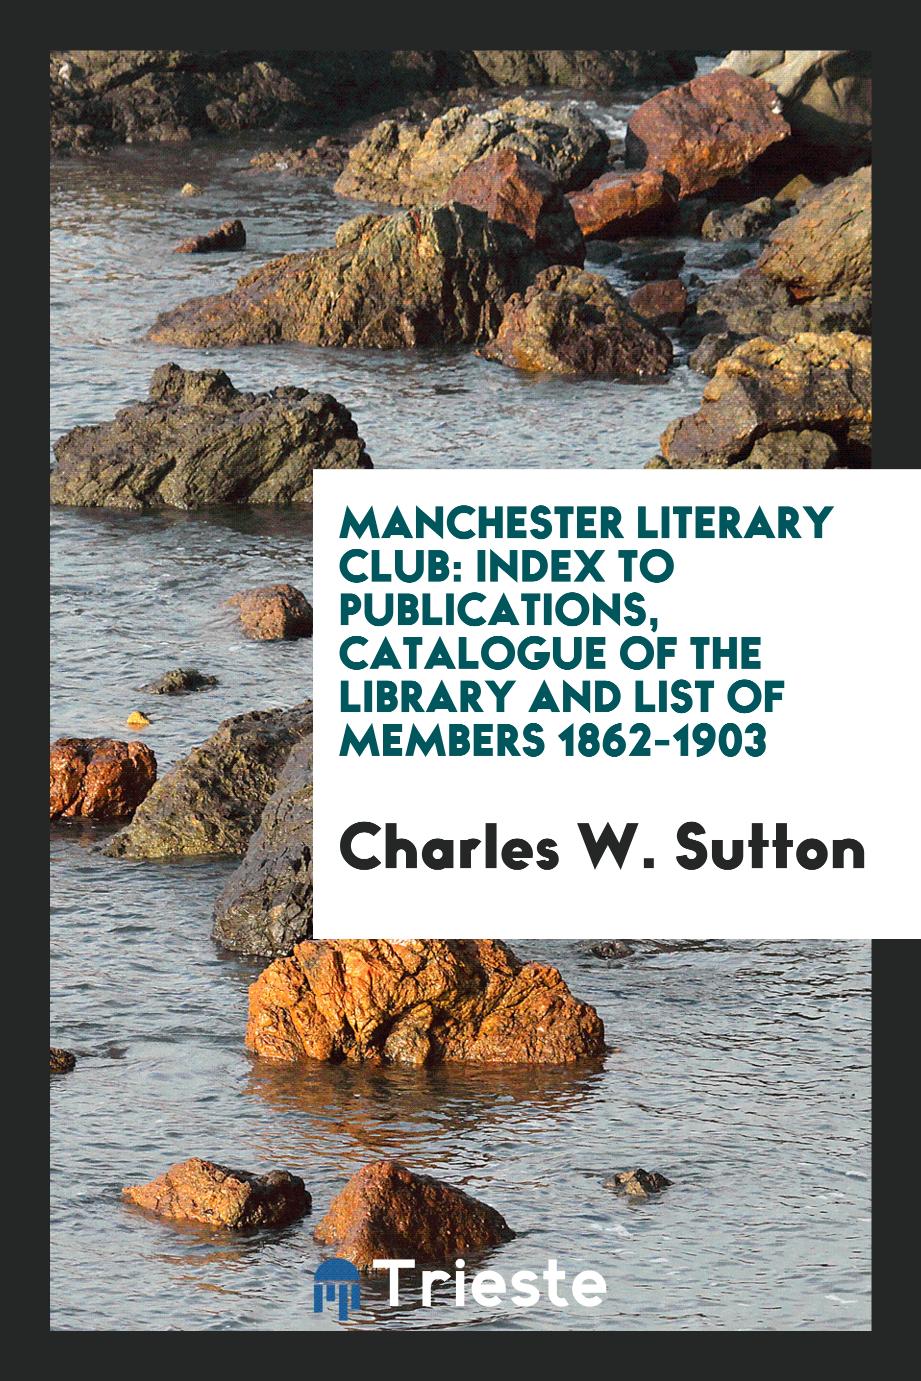 Manchester literary club: Index to publications, catalogue of the library and list of members 1862-1903